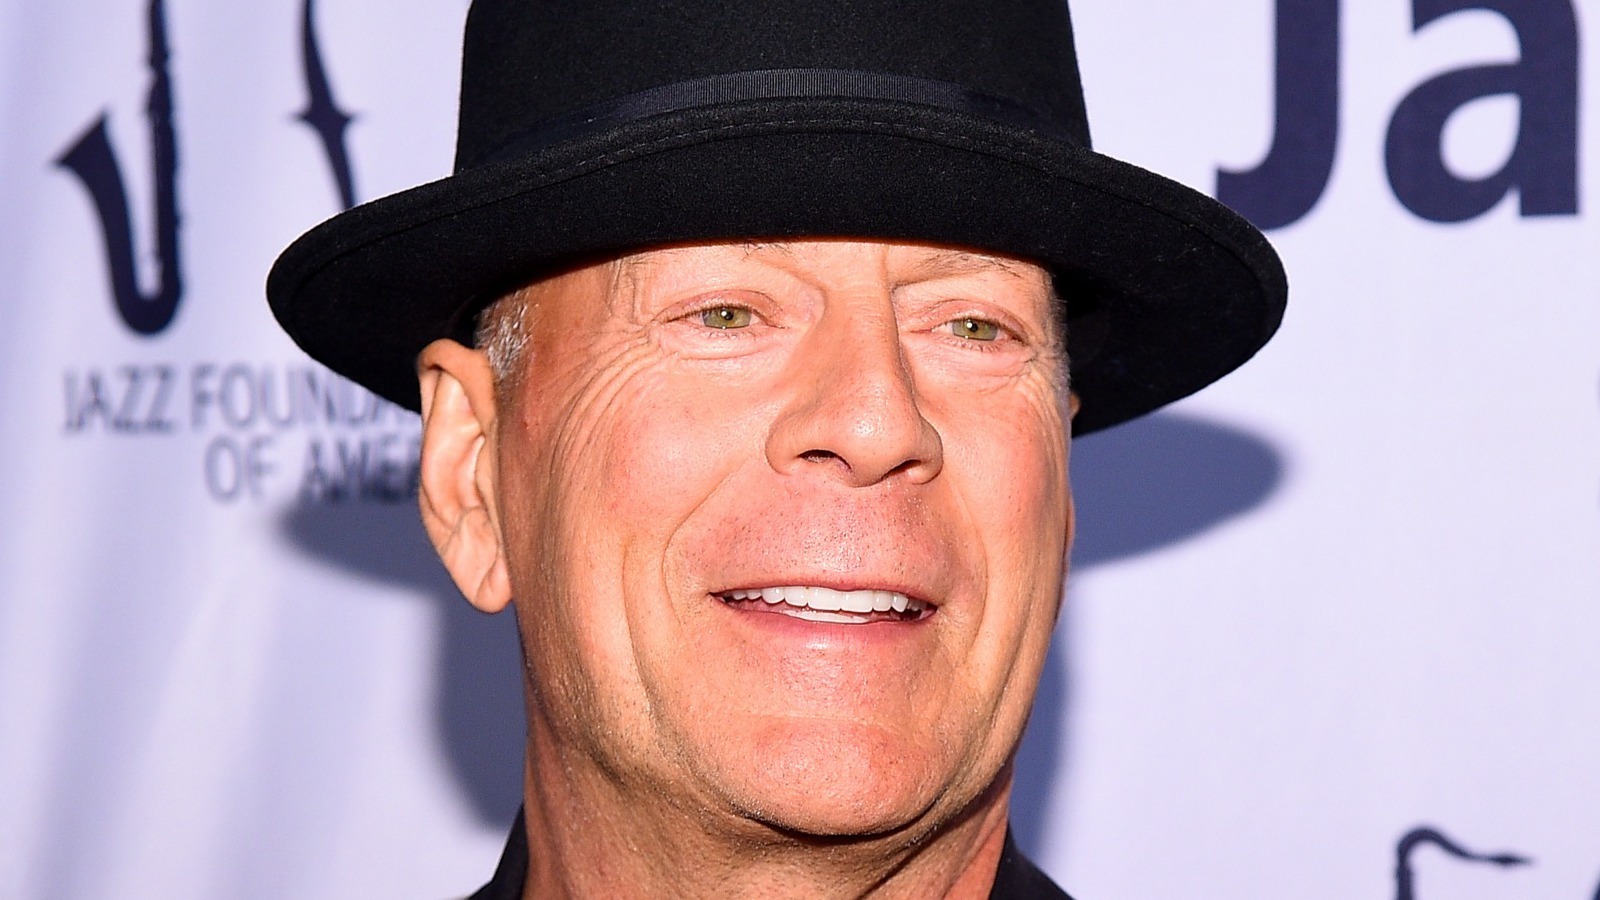 Bruce Willis' Highest-Rated Movie On Rotten Tomatoes Might Surprise You